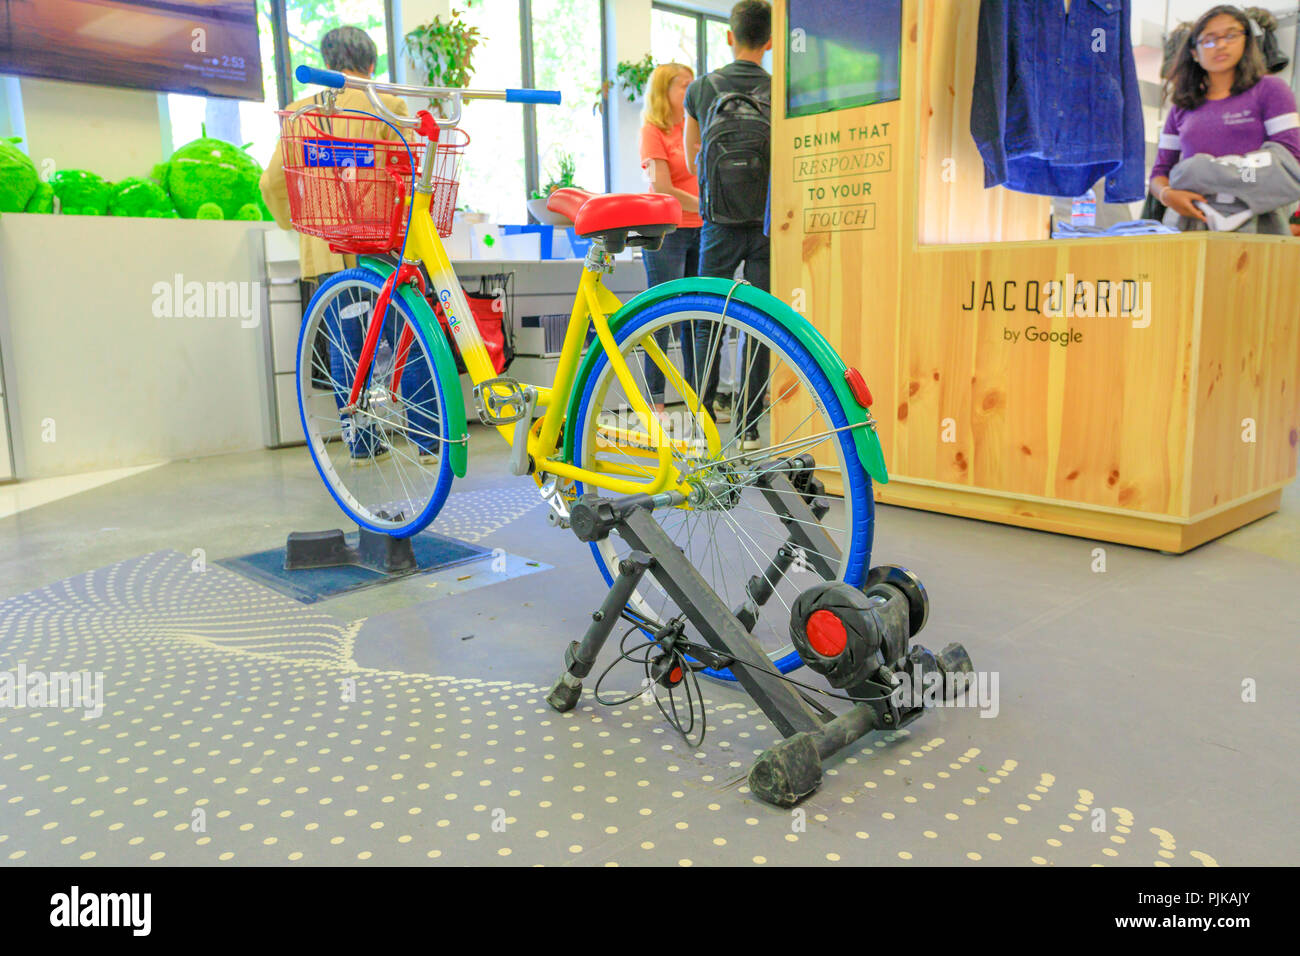 Mountain View, California, United States - August 13, 2018: colorful Google's Bike inside the Merchandise Store of Google in Silicon Valley. Gadget and branded souvenirs are sold in the shop. Stock Photo